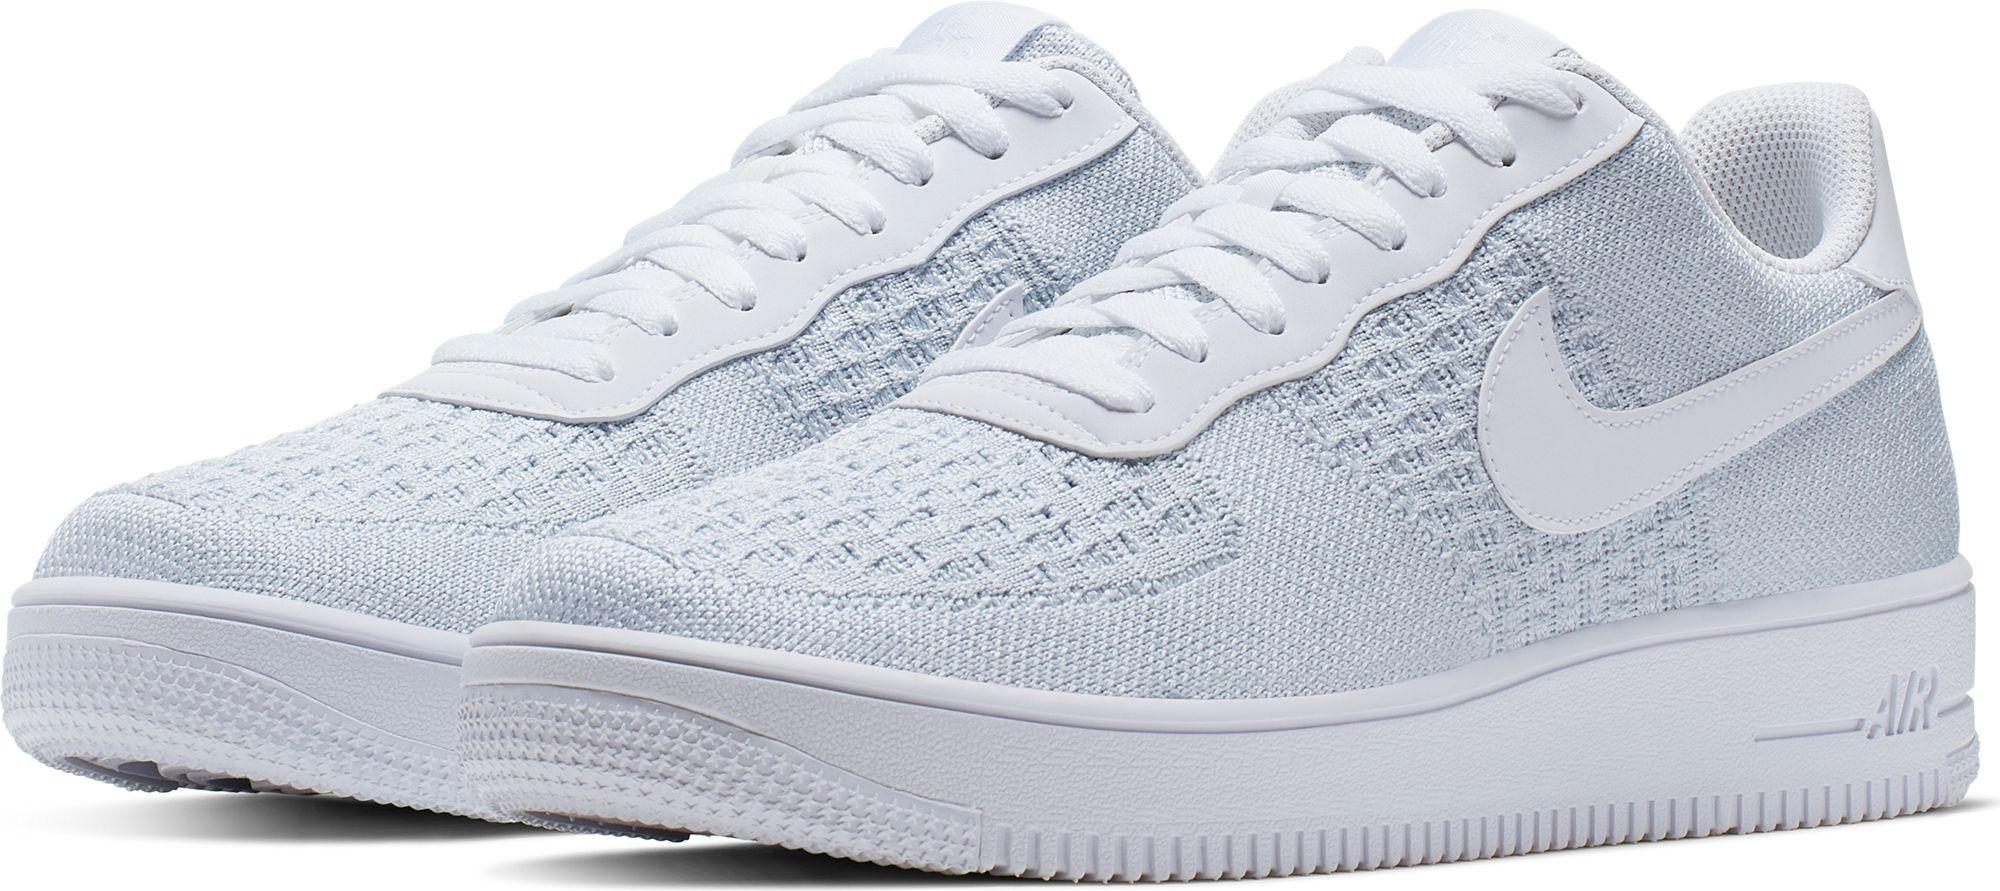 Nike Rubber Air Force 1 Flyknit 2.0 in White/Platinum (White) for 